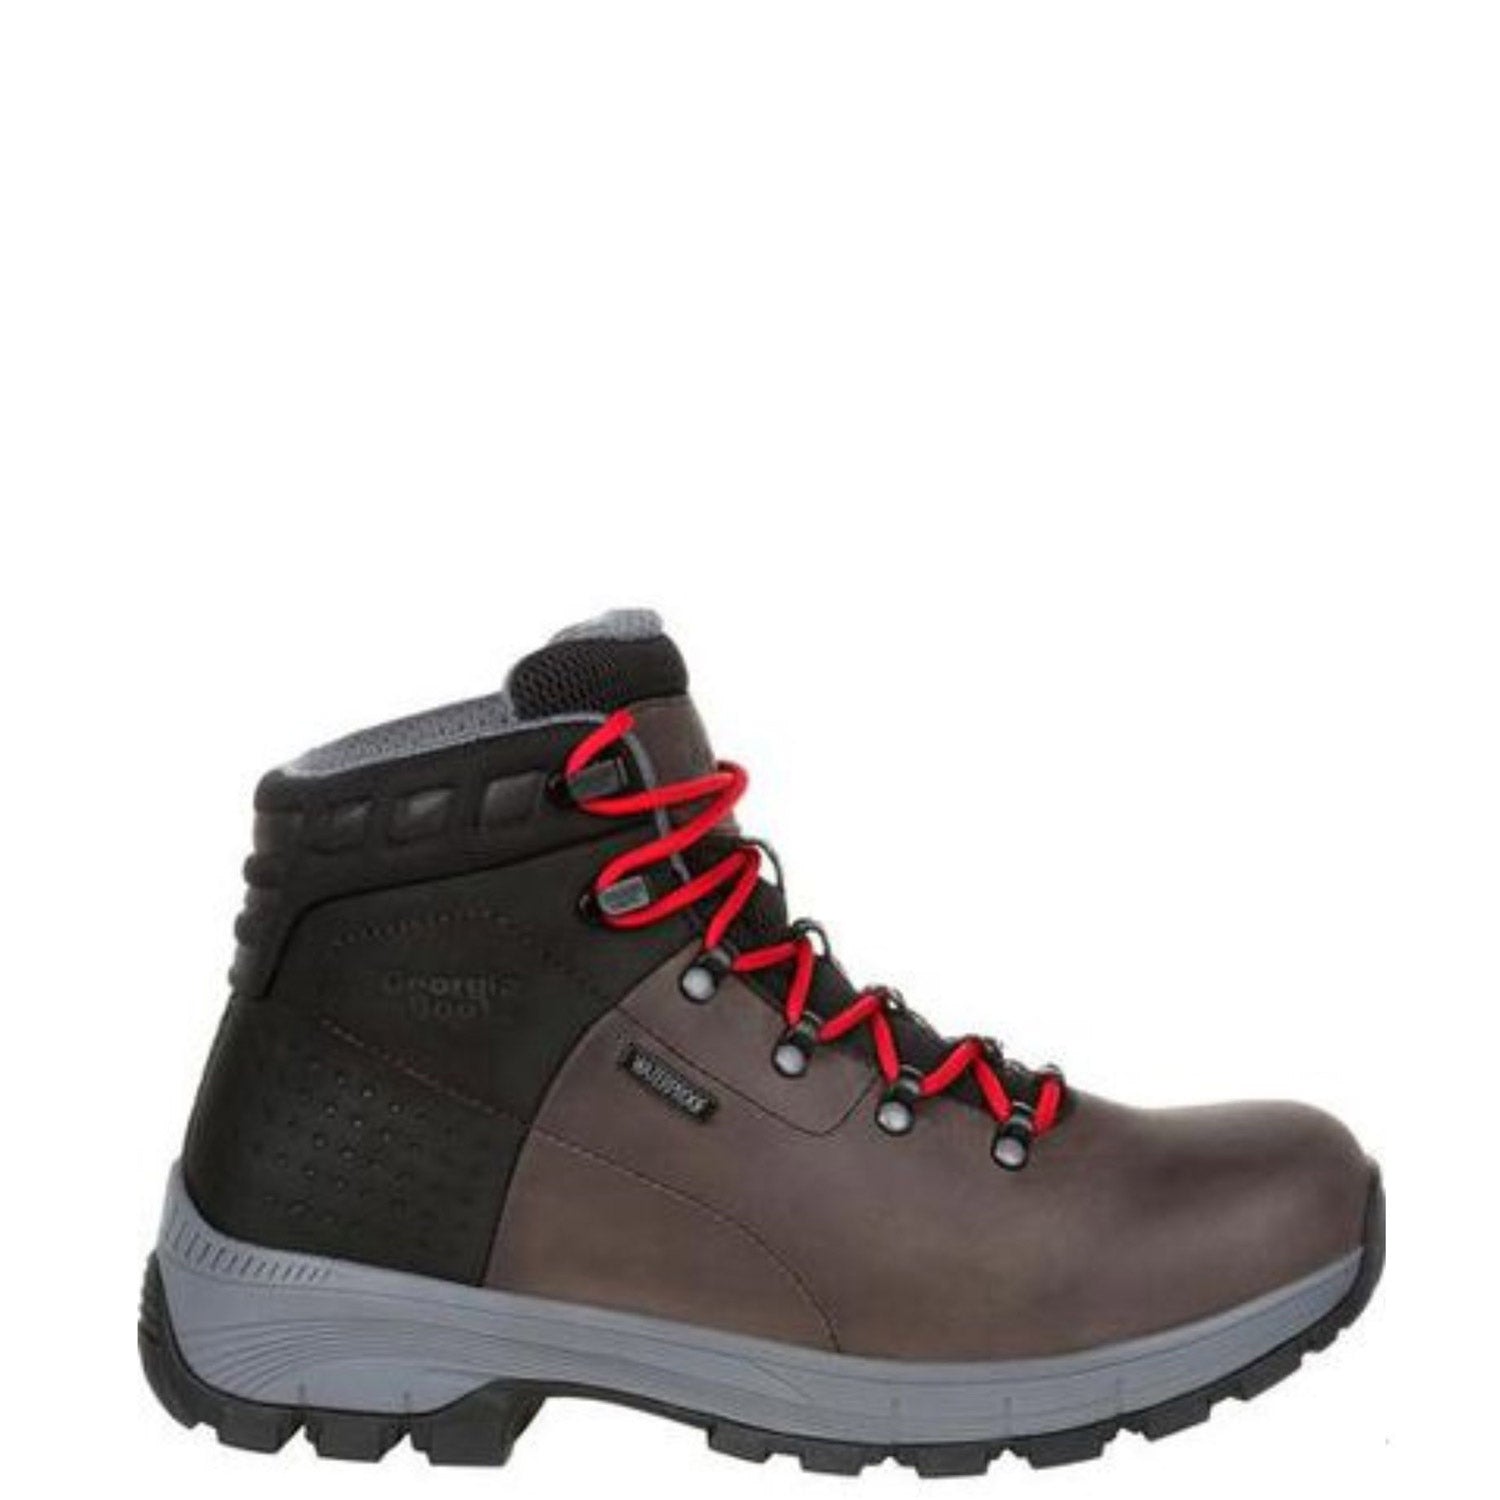 Georgia Boot Men's Eagle Trail 6" Waterproof EH Soft Toe Work Boot - Work World - Workwear, Work Boots, Safety Gear